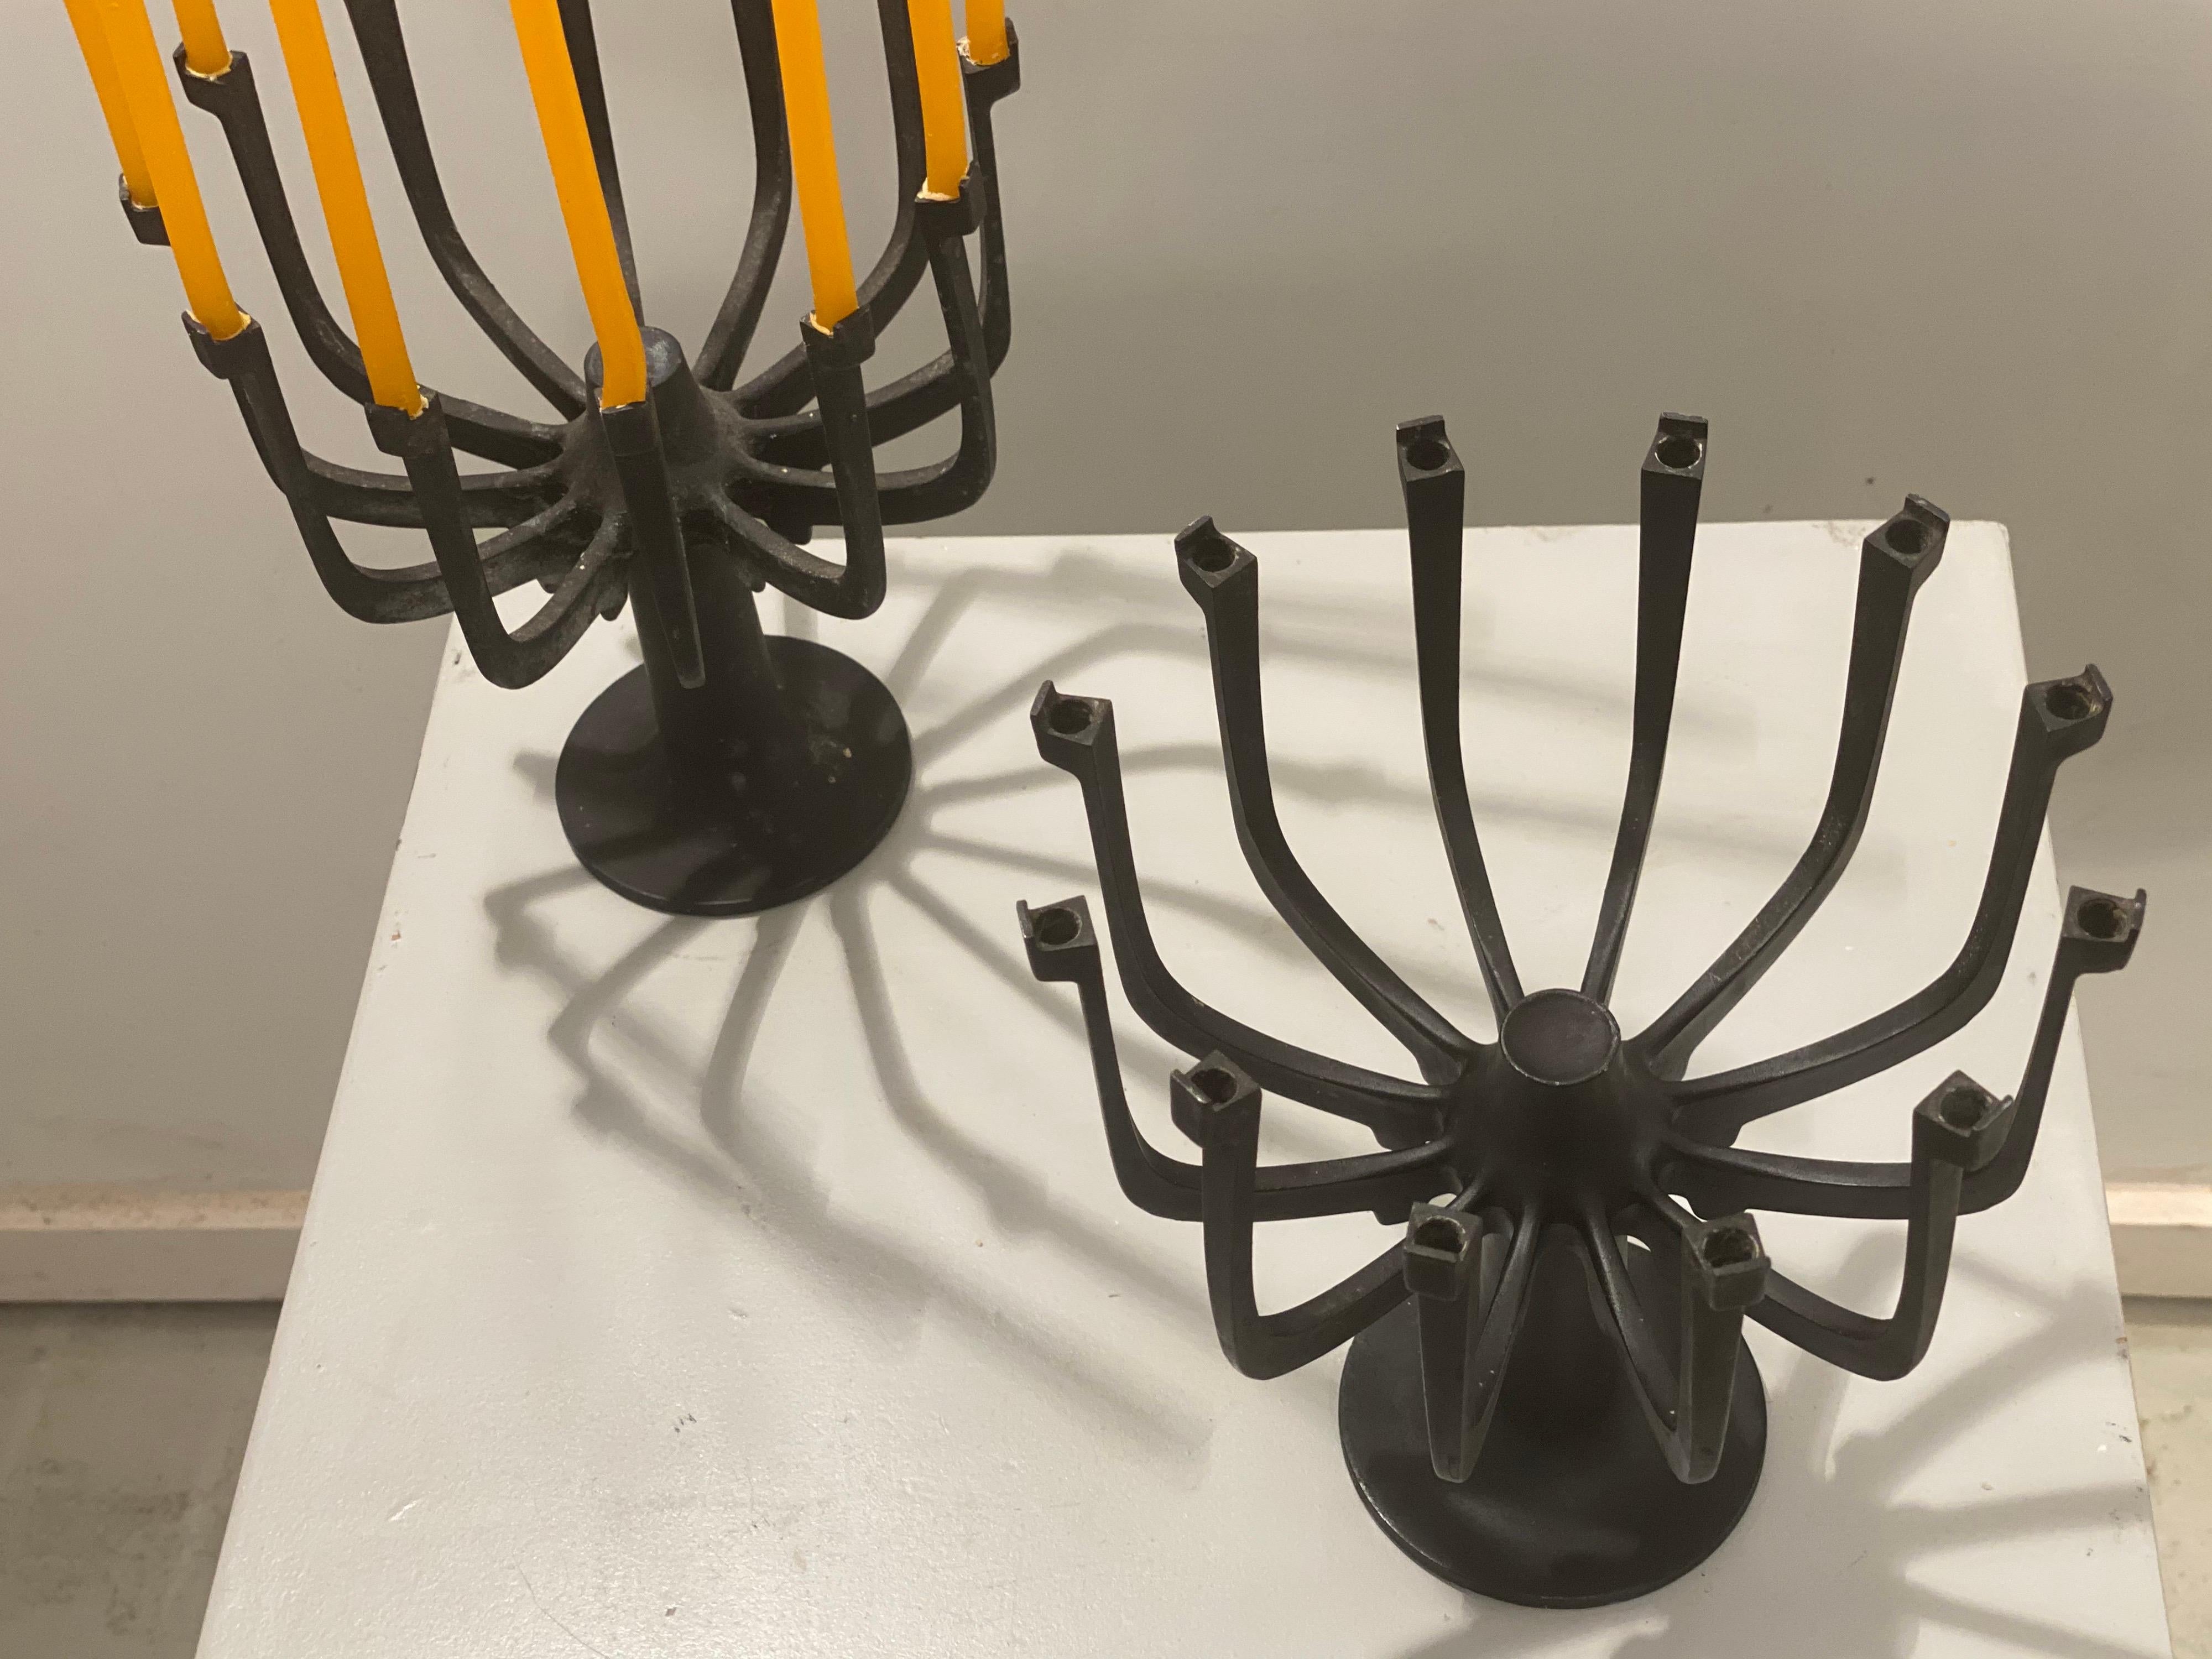 Pair of Gunnar Cyren Aglow 12 Candle Holders for Dansk, 1960s In Good Condition For Sale In Amsterdam, NL